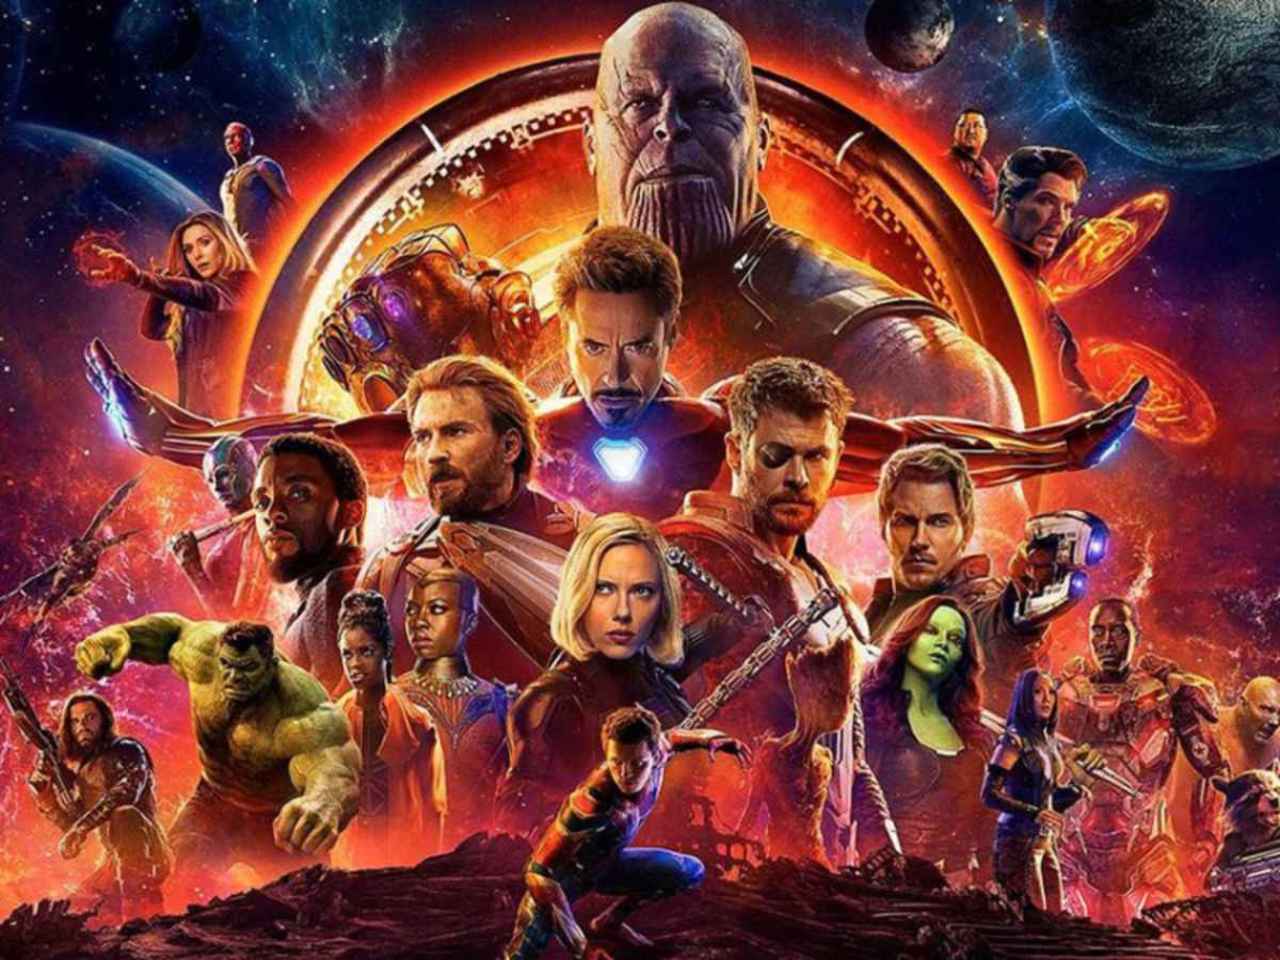 Avengers: Endgame' full movie box office collection Day 18: The